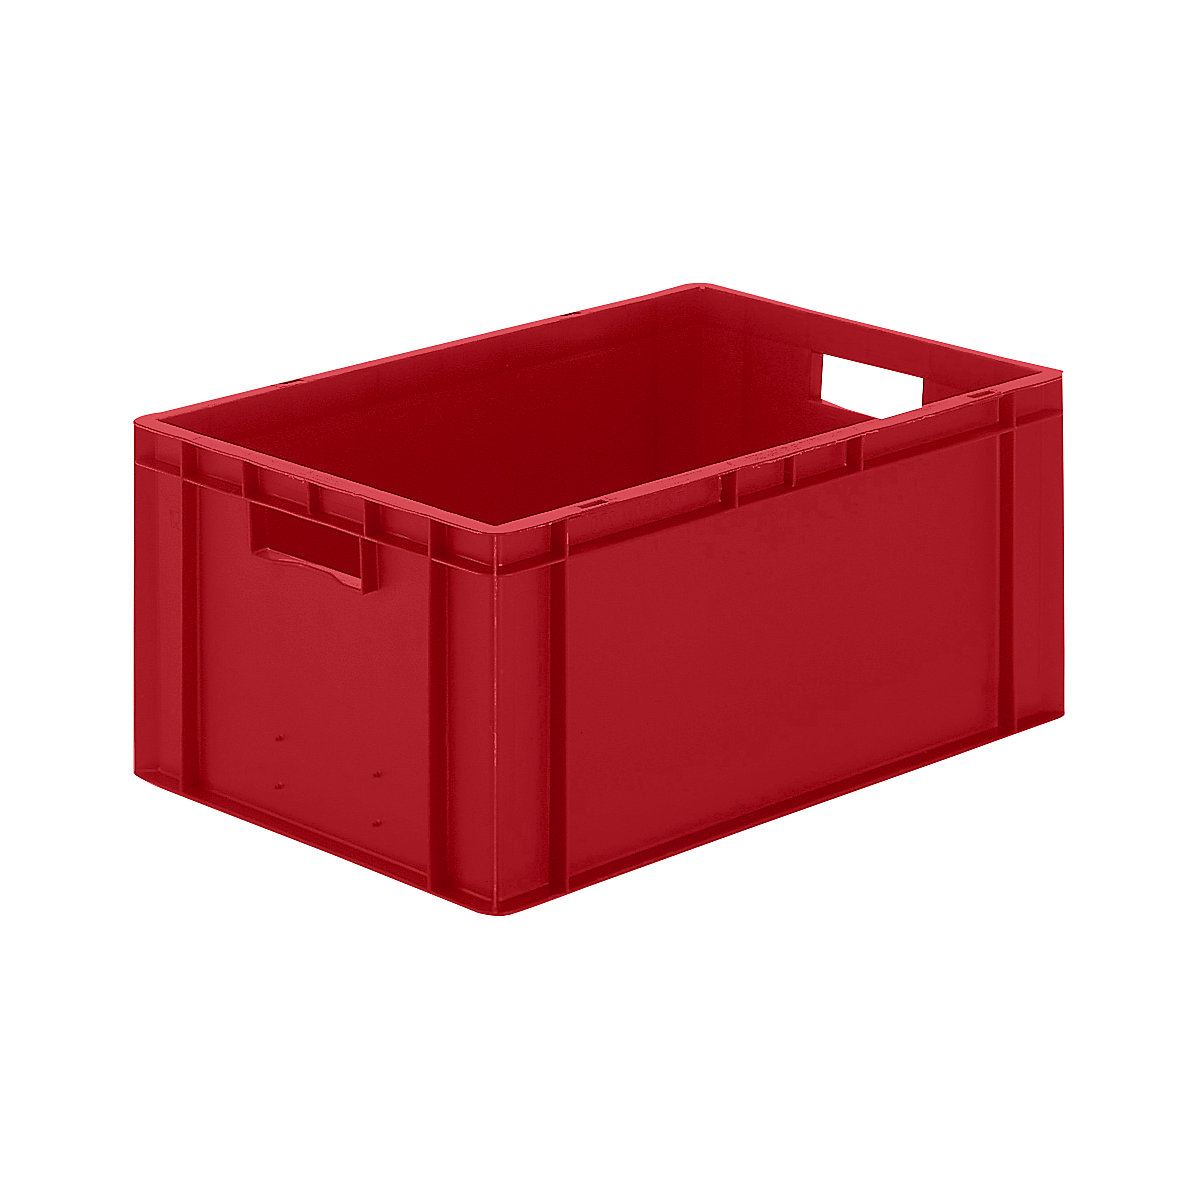 Euro stacking container, closed walls and base, LxWxH 600 x 400 x 270 mm, red, pack of 5-8